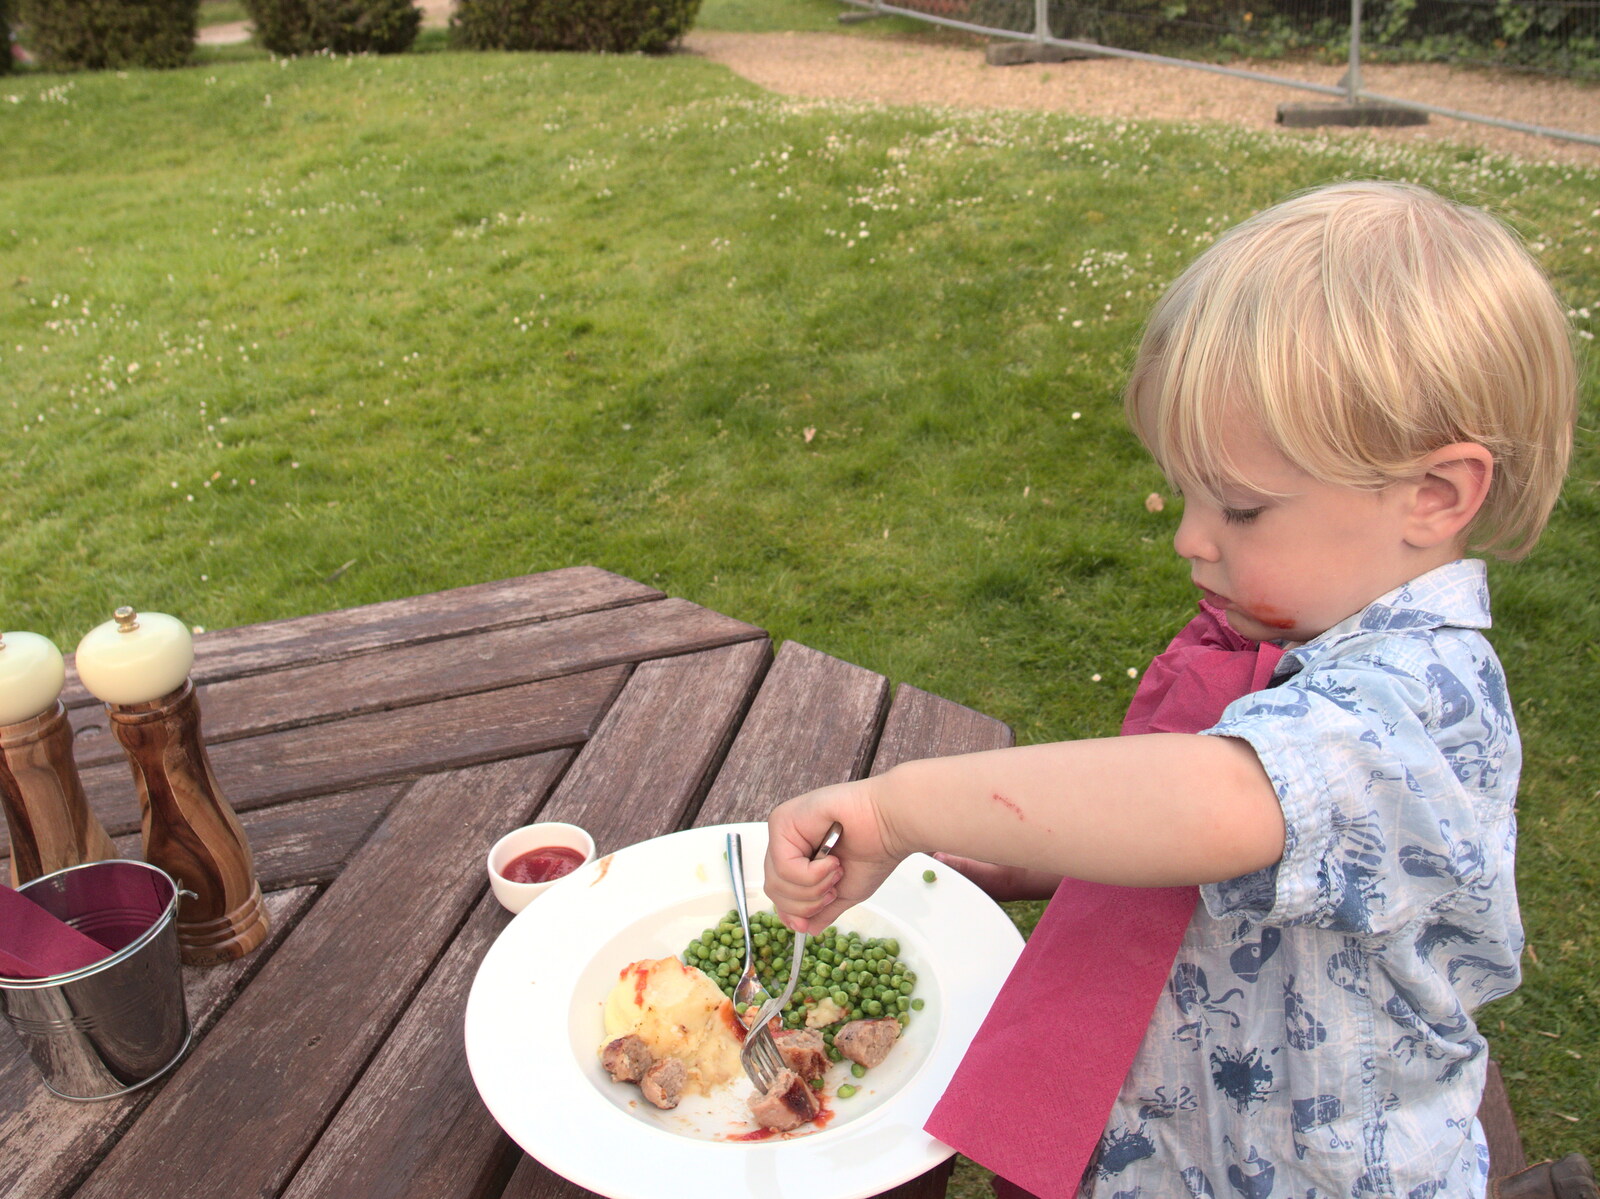 Harry eats sausages and mash for lunch from Thornham Four Horseshoes, and the Oaksmere, Brome, Suffolk - 17th May 2014